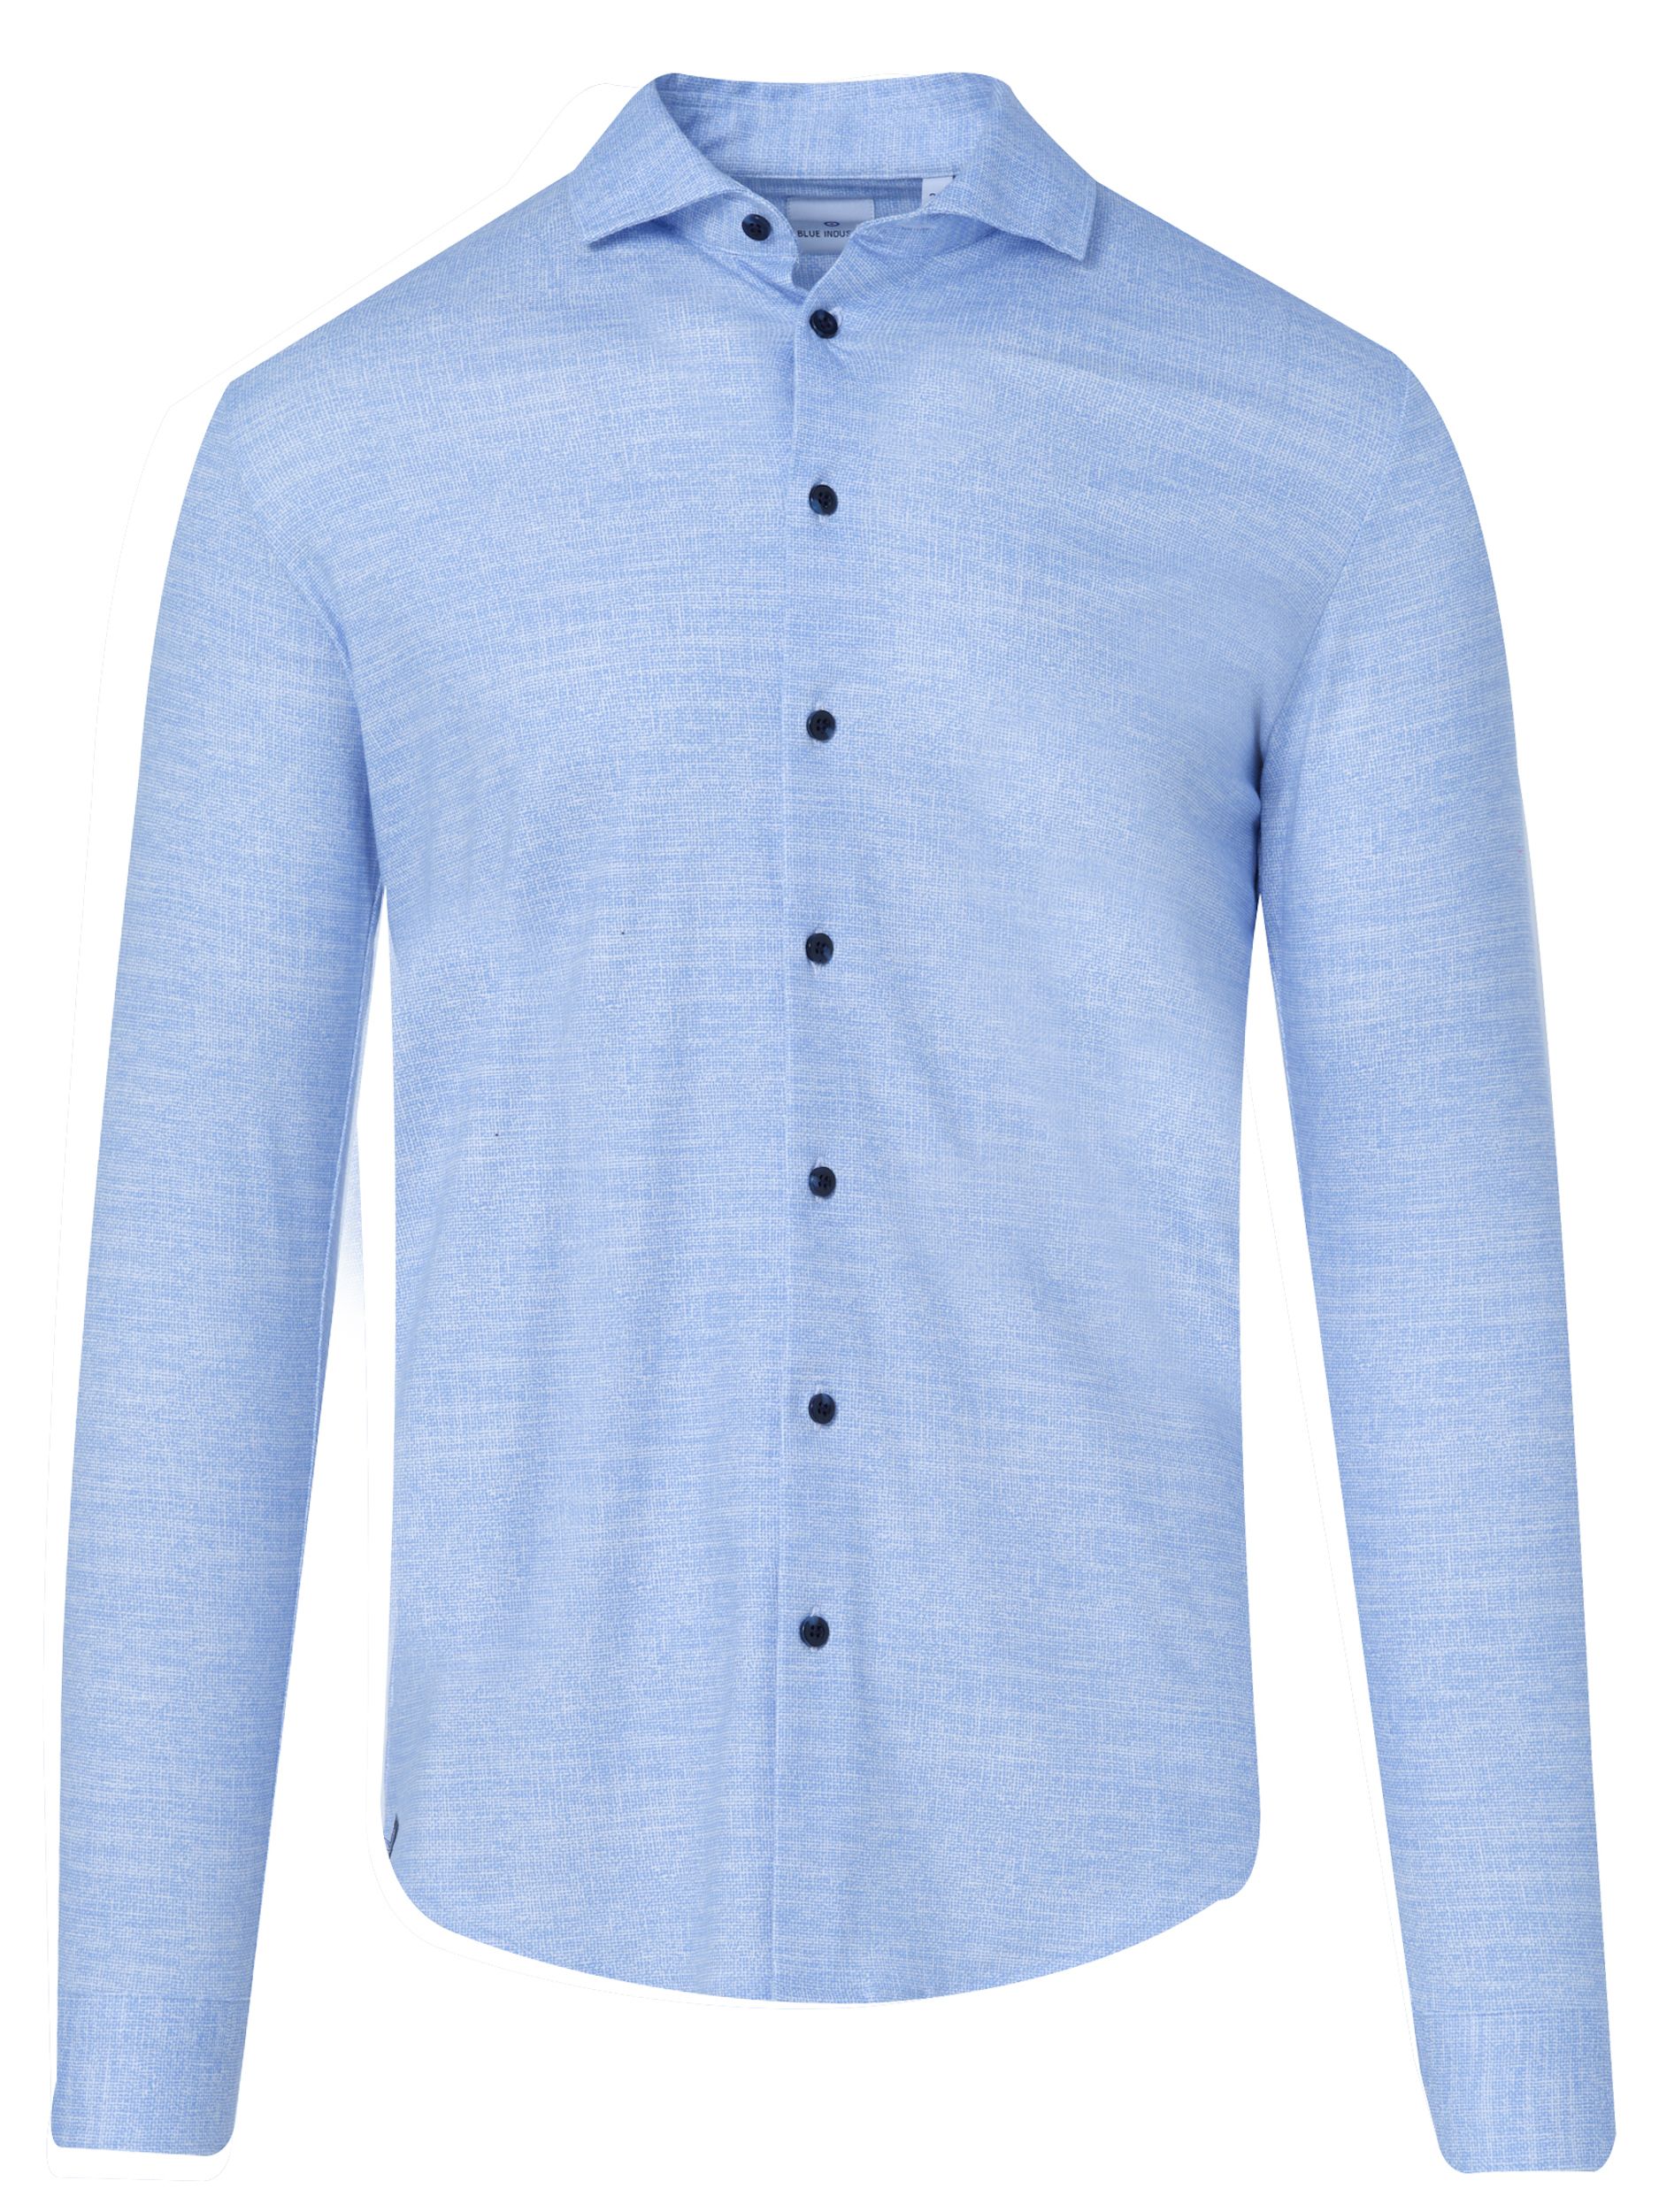 Blue Industry Casual Overhemd LM Blauw 085229-001-37